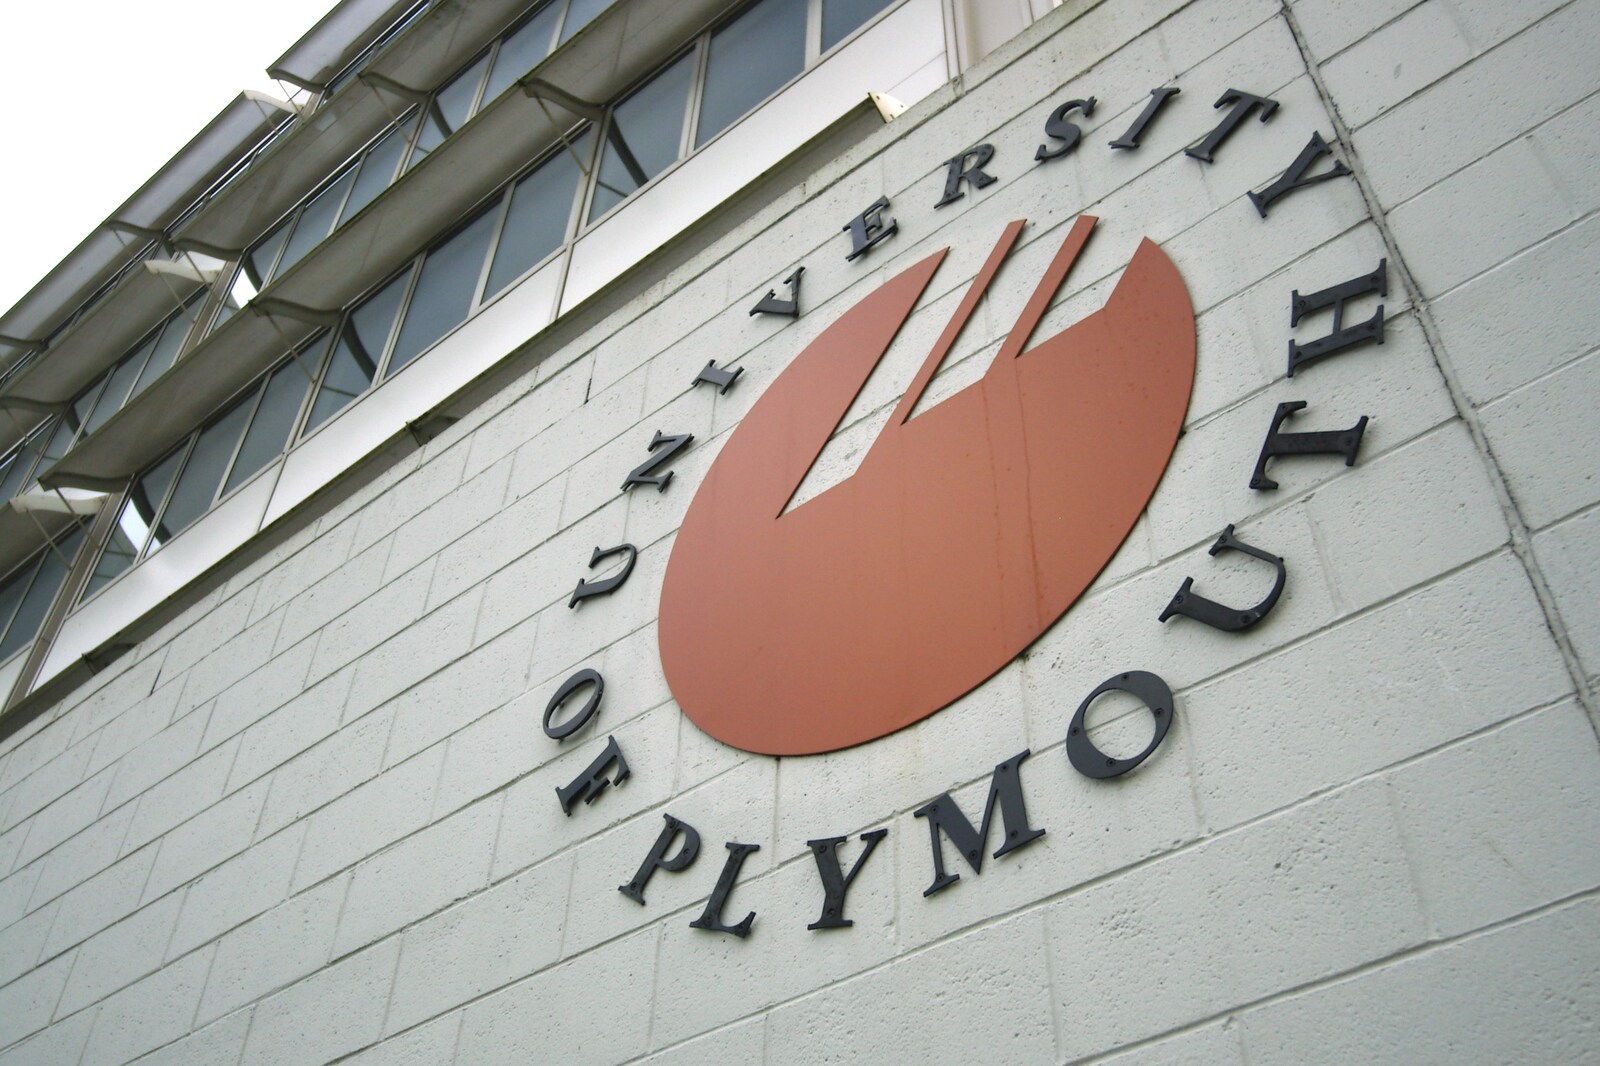 The University of Plymouth logo on the GTB wall from Uni: A Wander Around the Campus, Plymouth, Devon - 18th December 2005